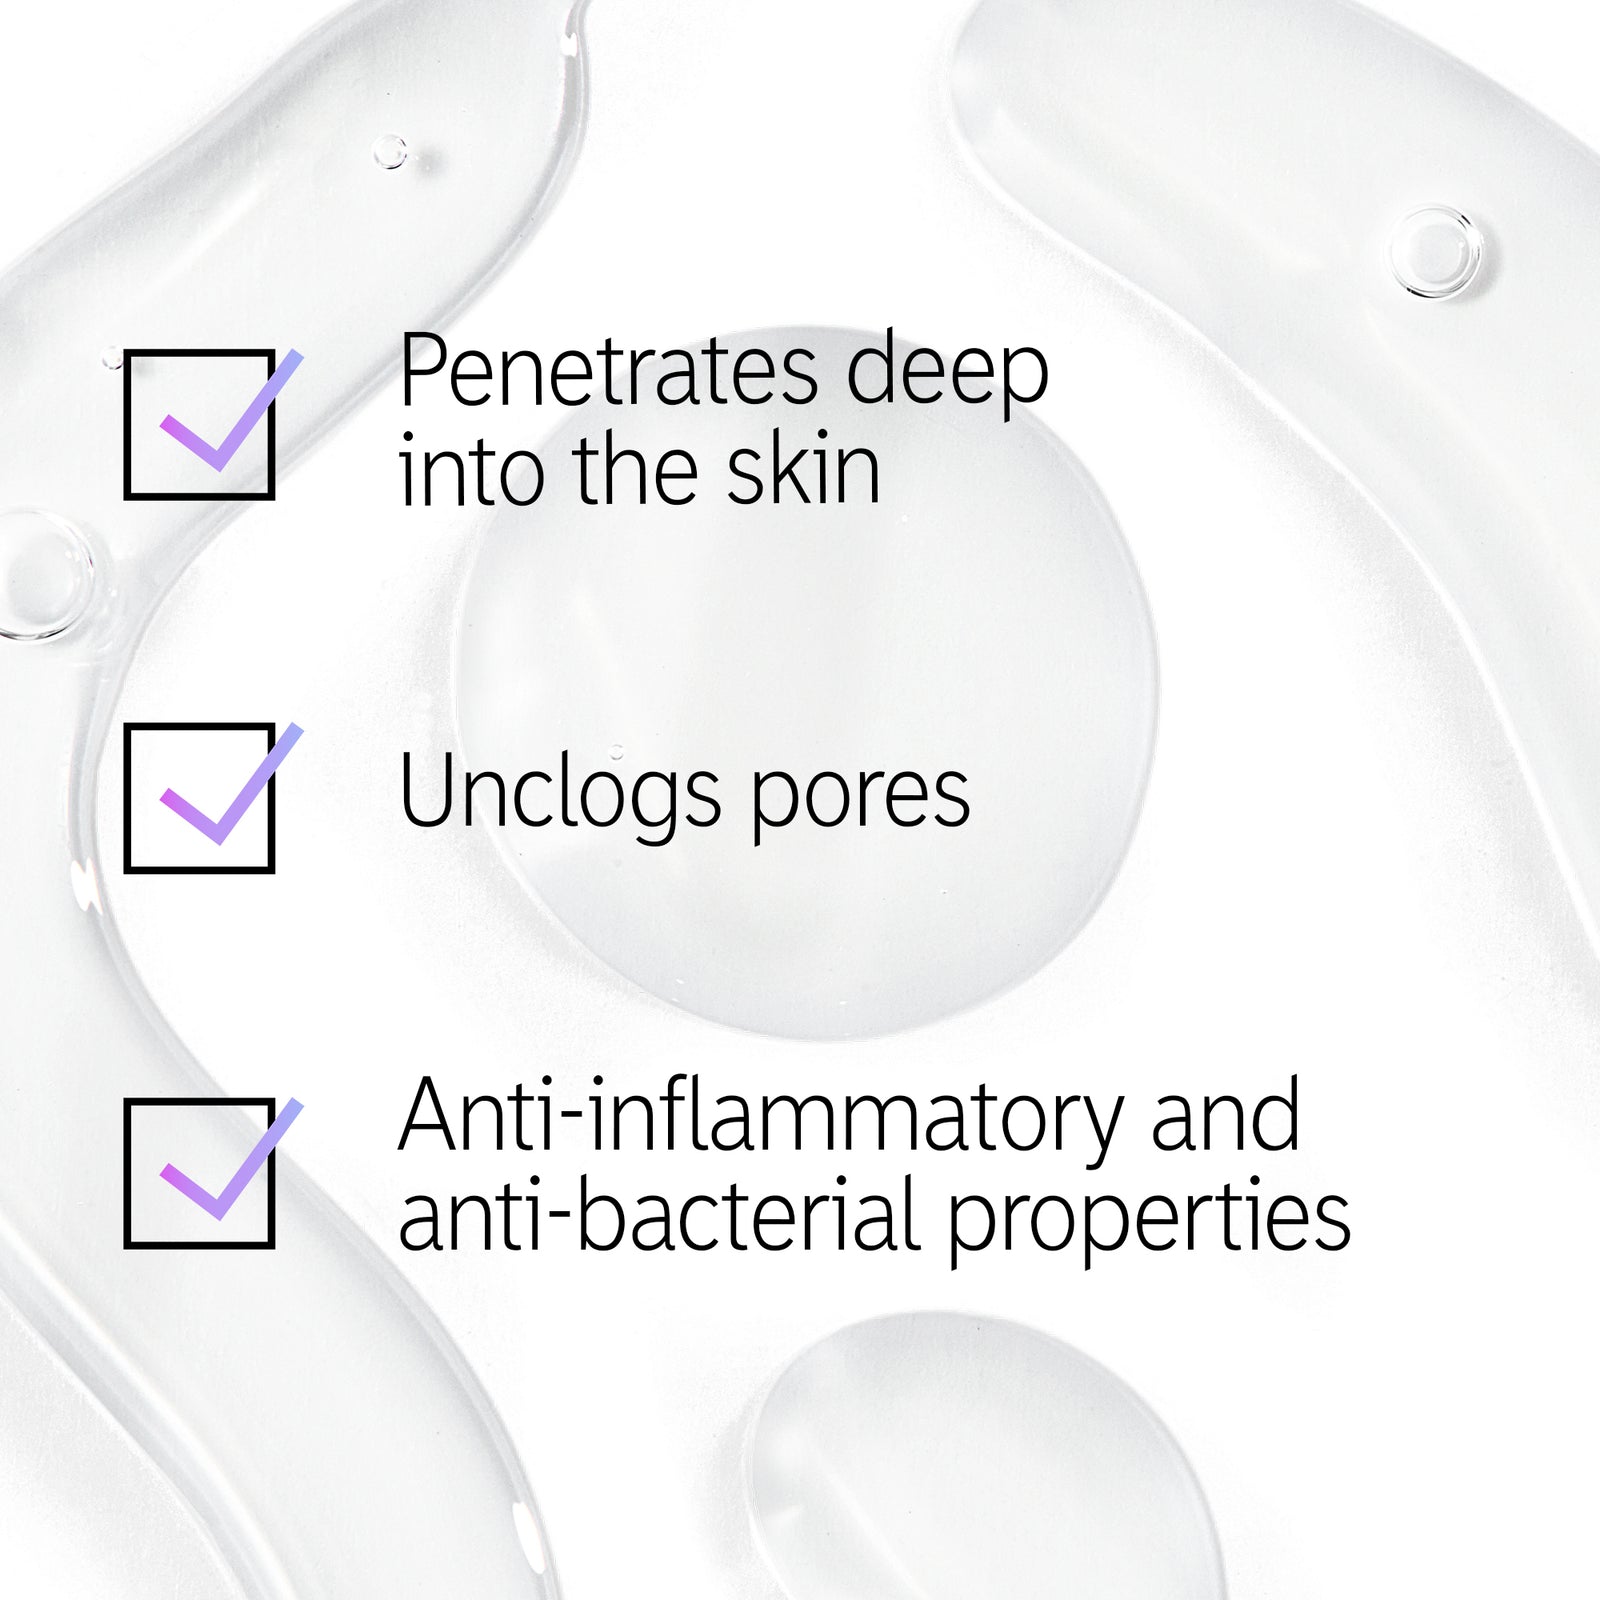 Product texture with text overlay  'Penetrates deep into the skin', 'Unclogs pores' and 'Anti-flammatory and anti-bacterial properties'